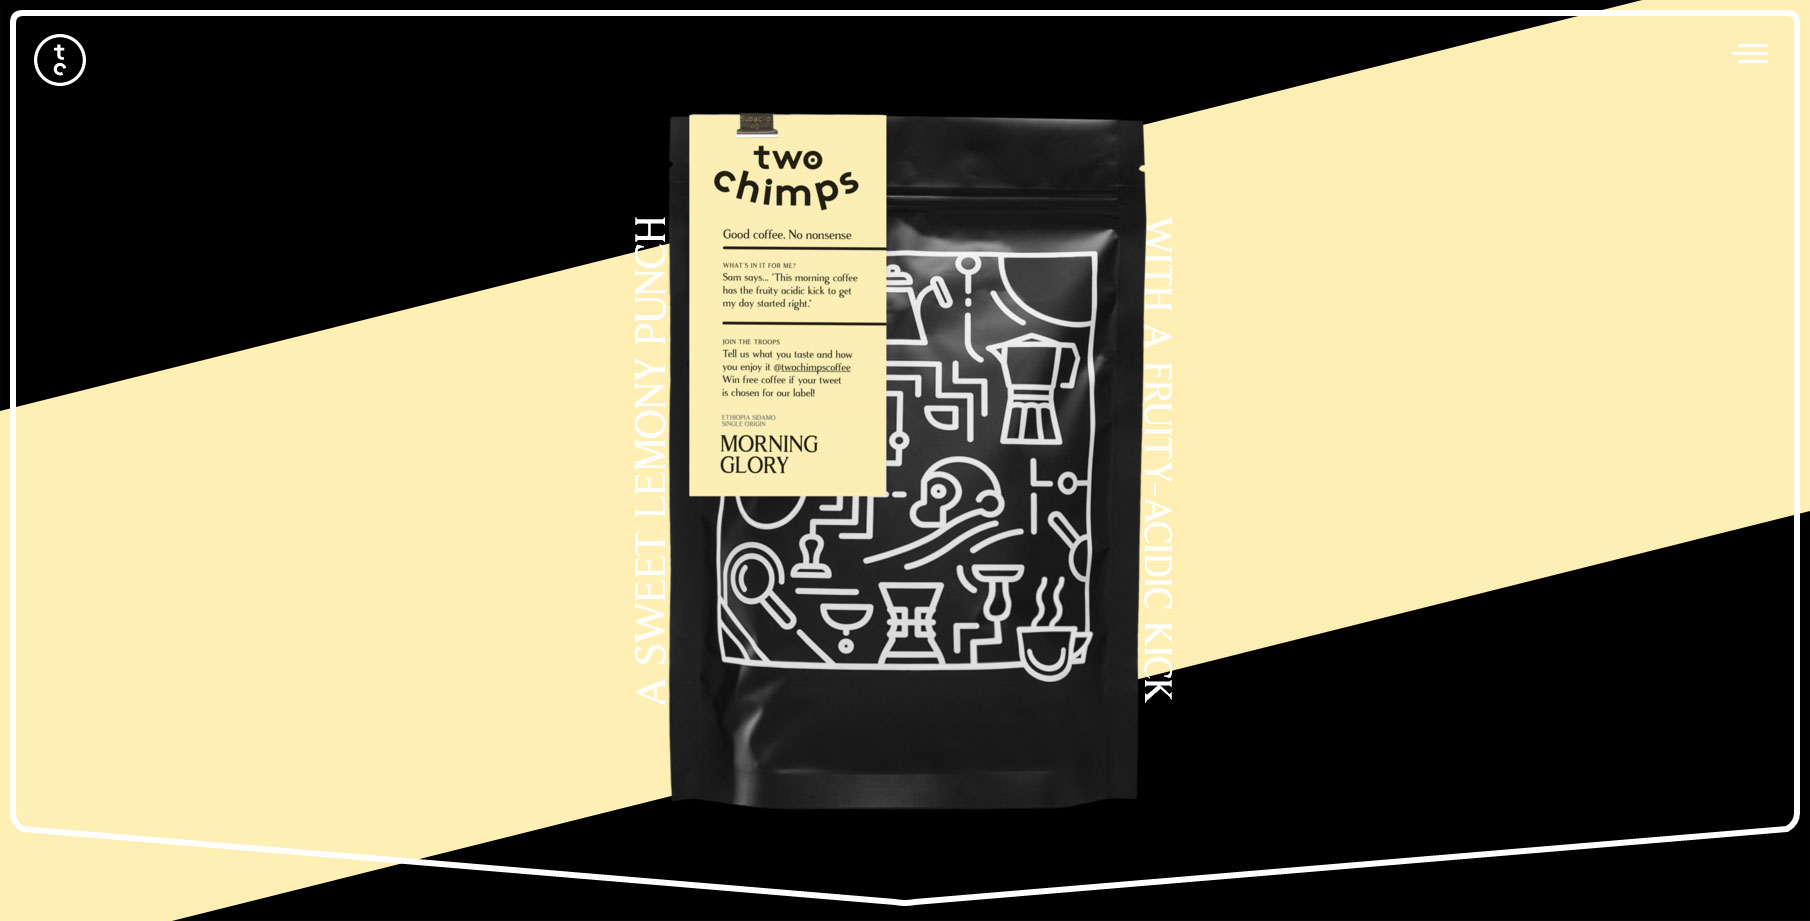 Two Chimps Coffee - Website of the Day